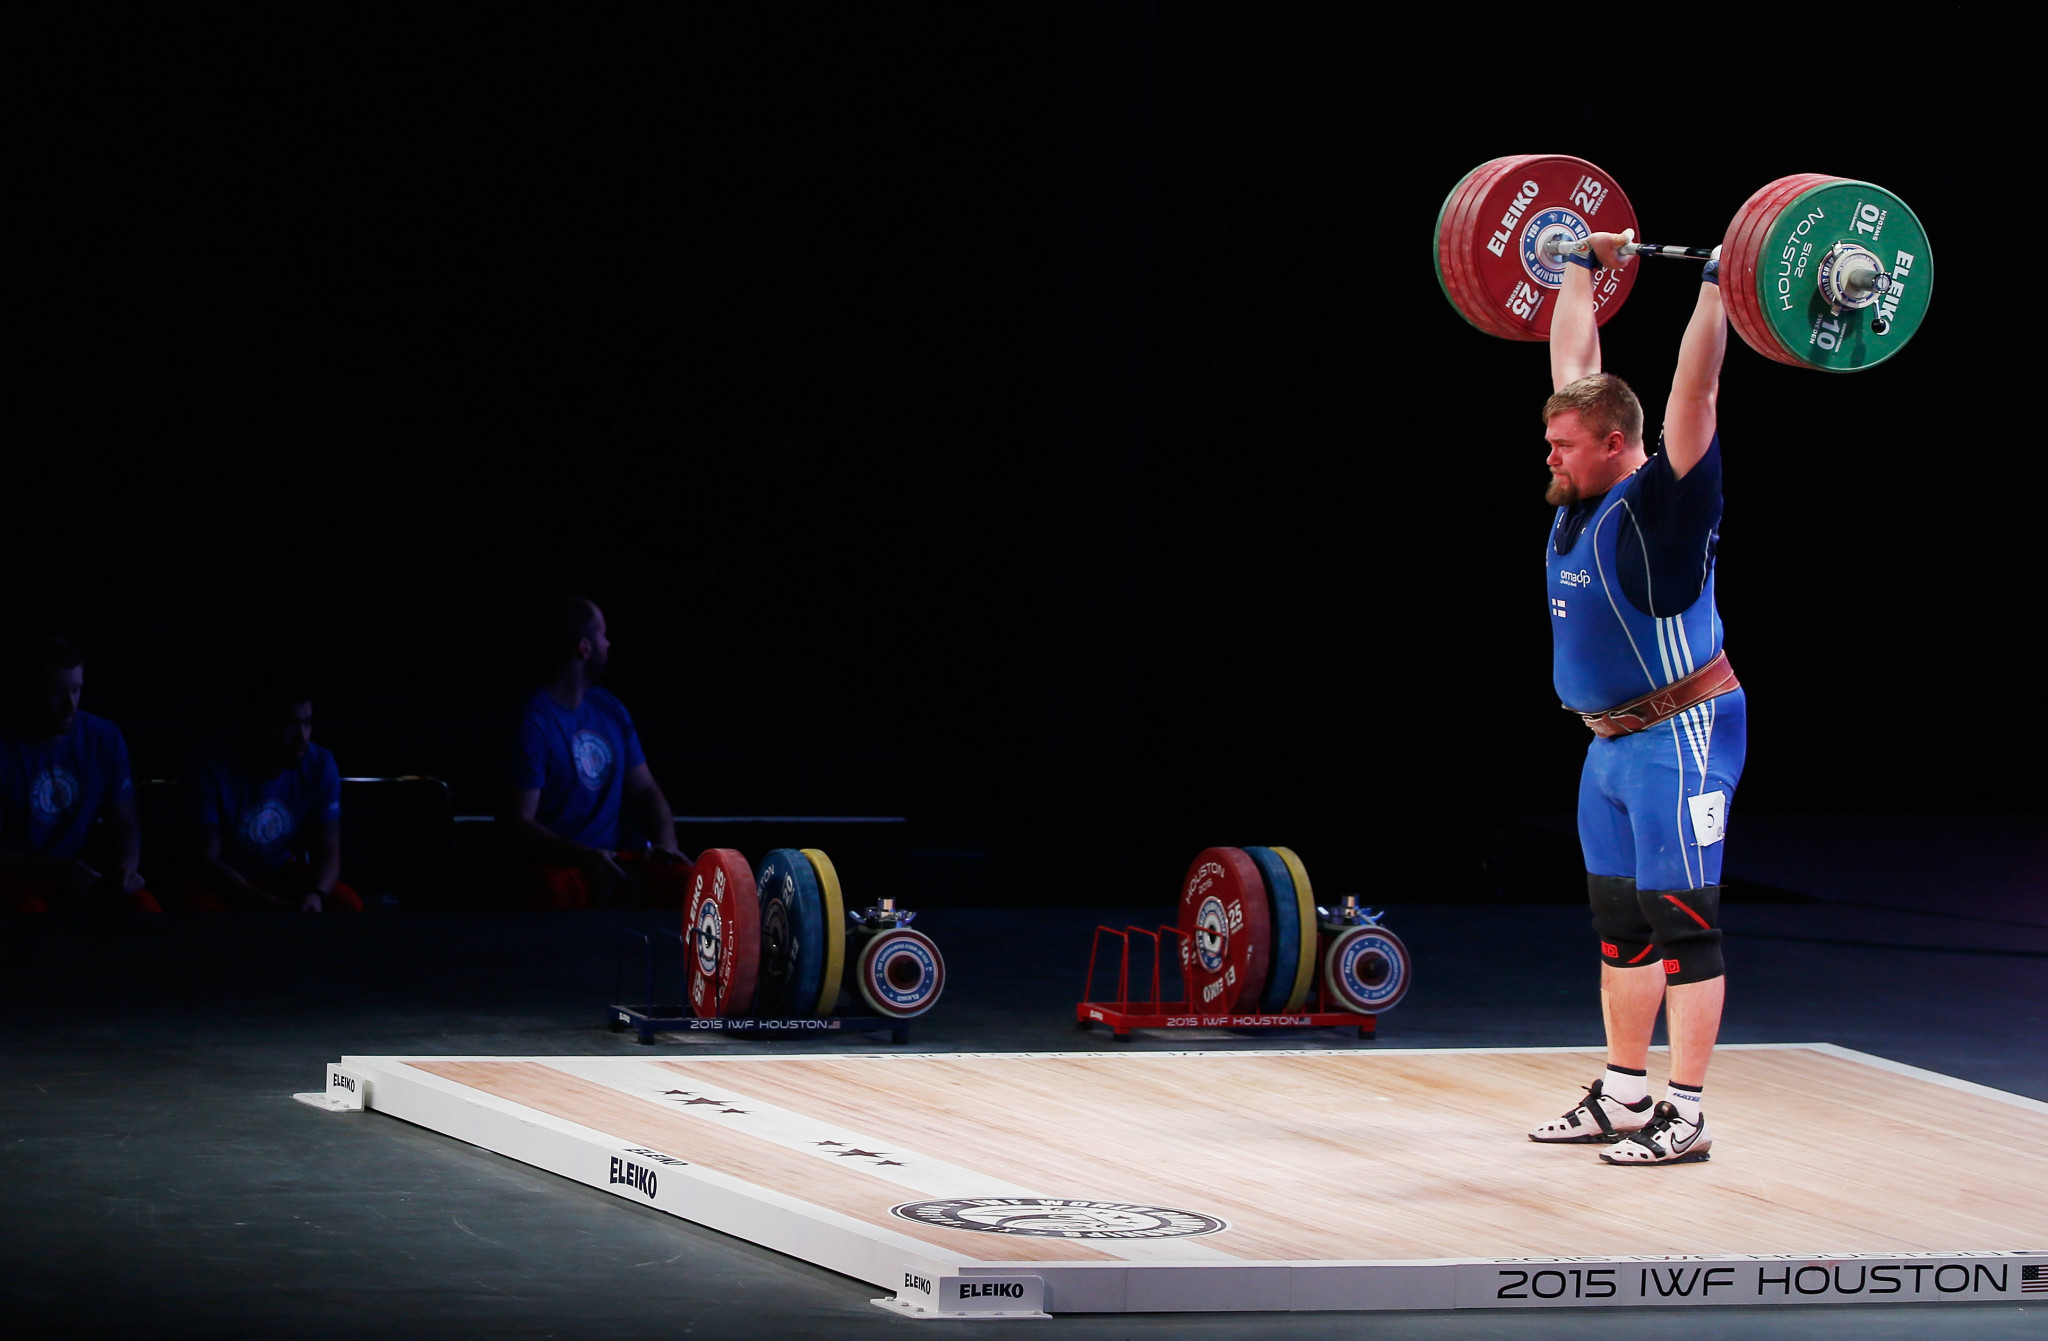 Anaheim will follow fellow American city Houston in hosting the IWF World Weightlifting Championships ©Getty Images